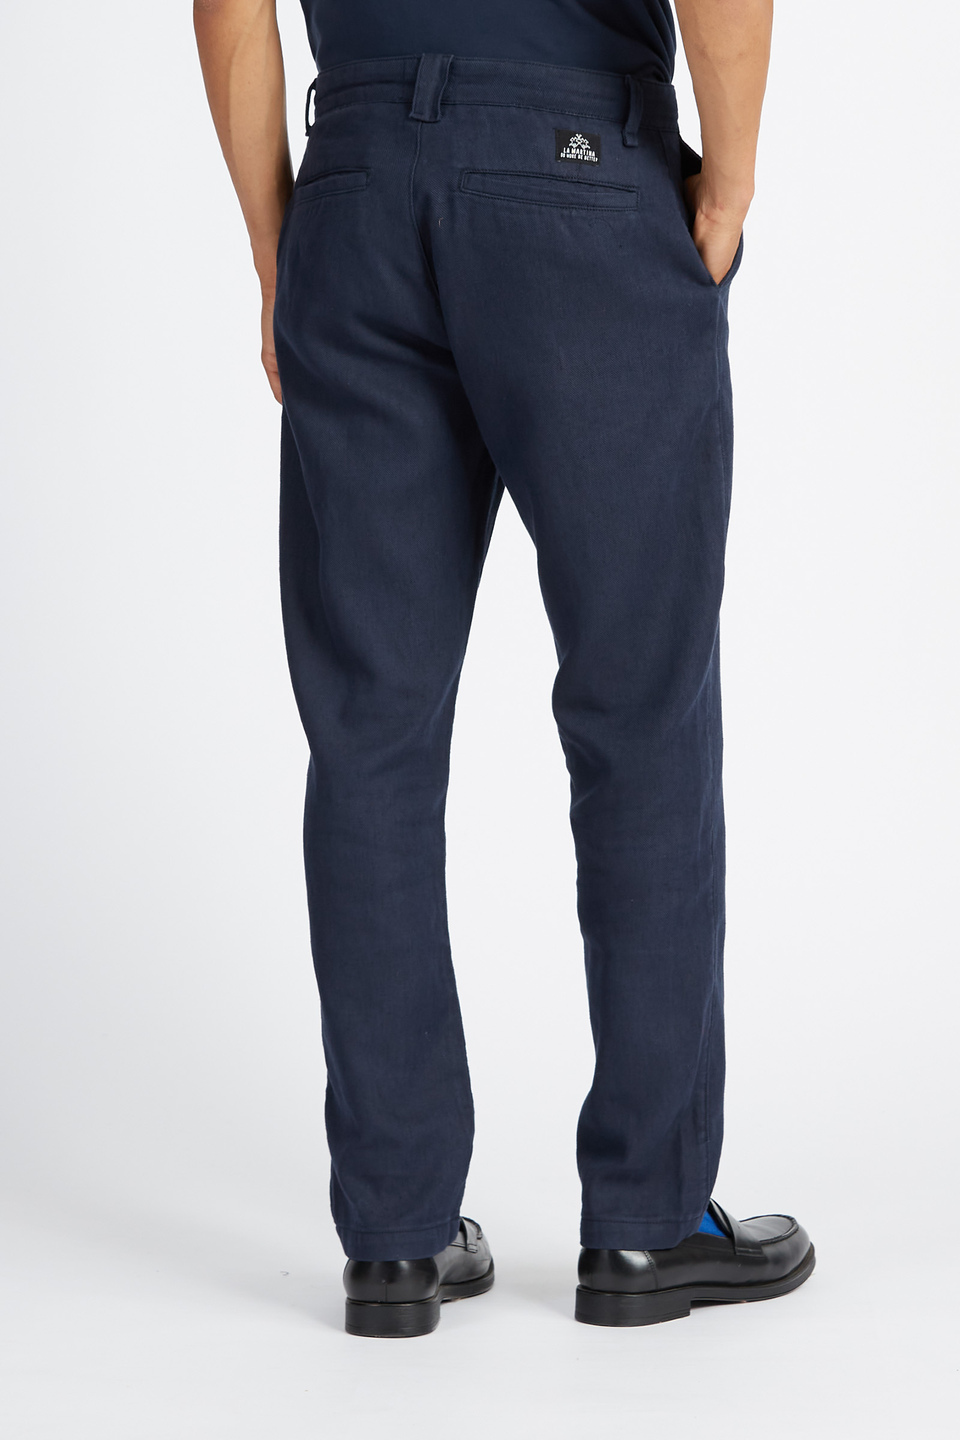 Straight cut men's chino trousers in plain color Logos - Vickan | La Martina - Official Online Shop